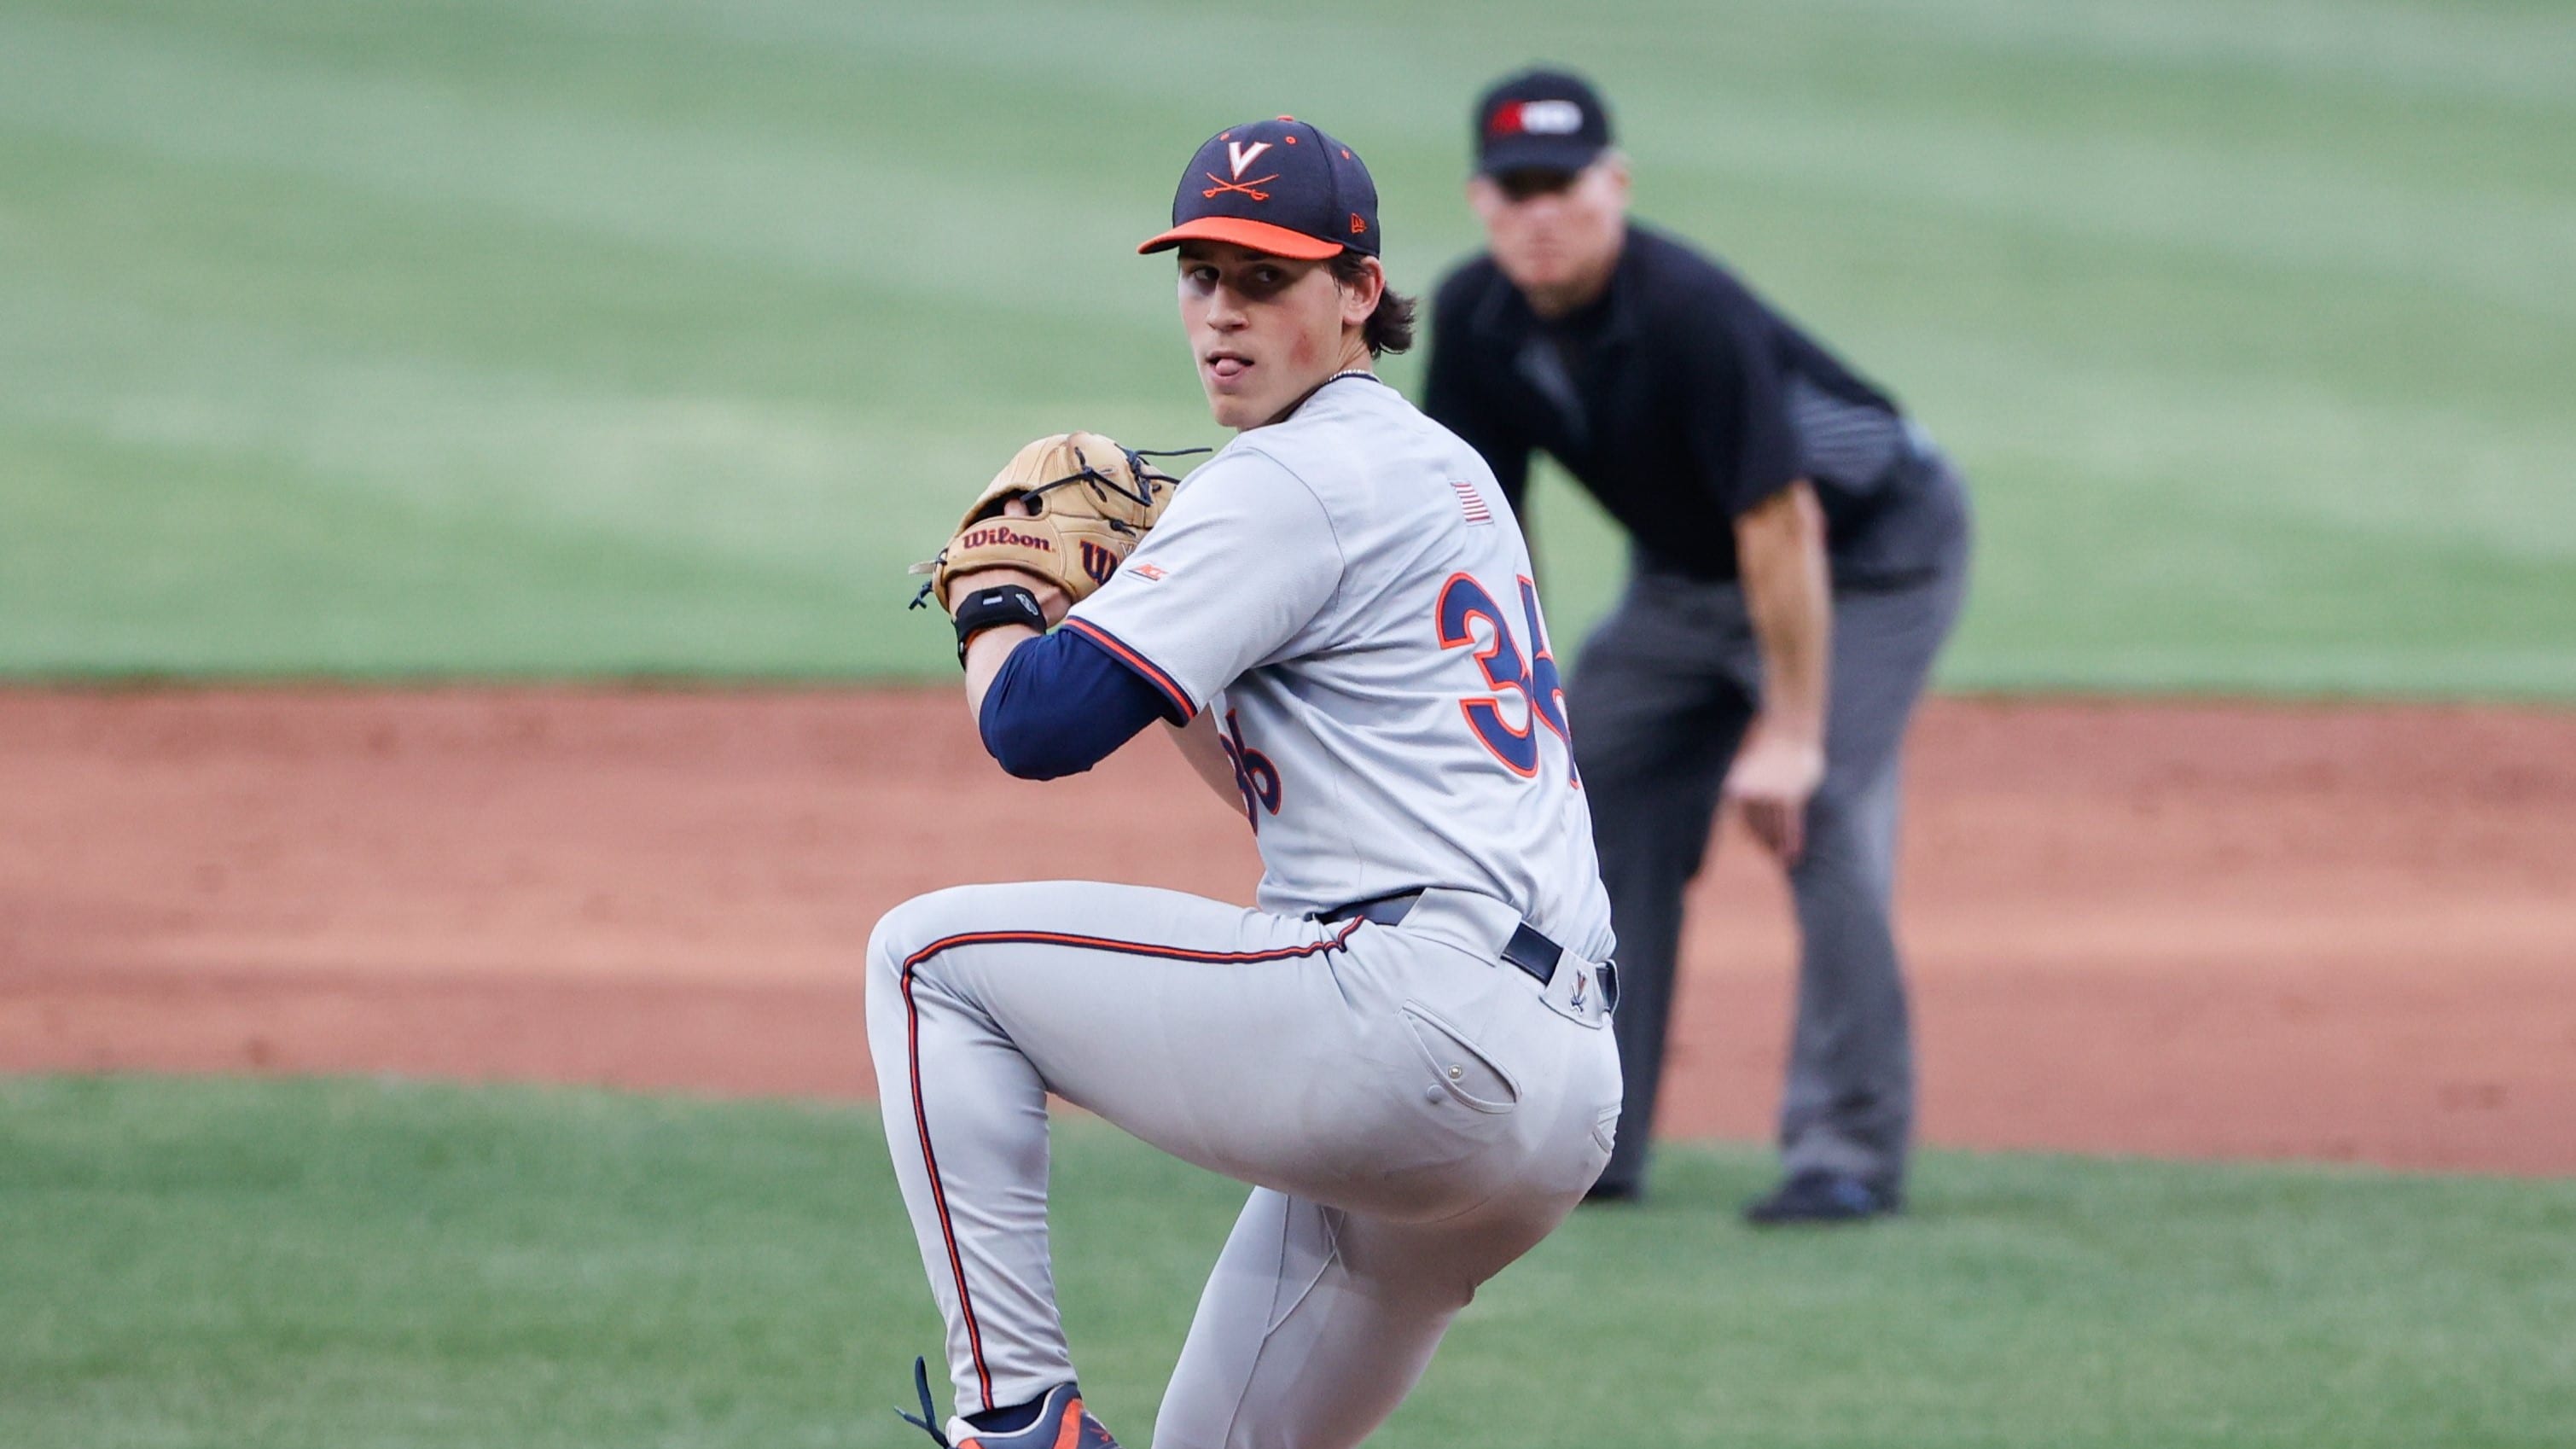 Virginia Baseball Sweeps VCU With 8-4 Victory: Four Homers Power Bryson Moore’s Stellar Pitching